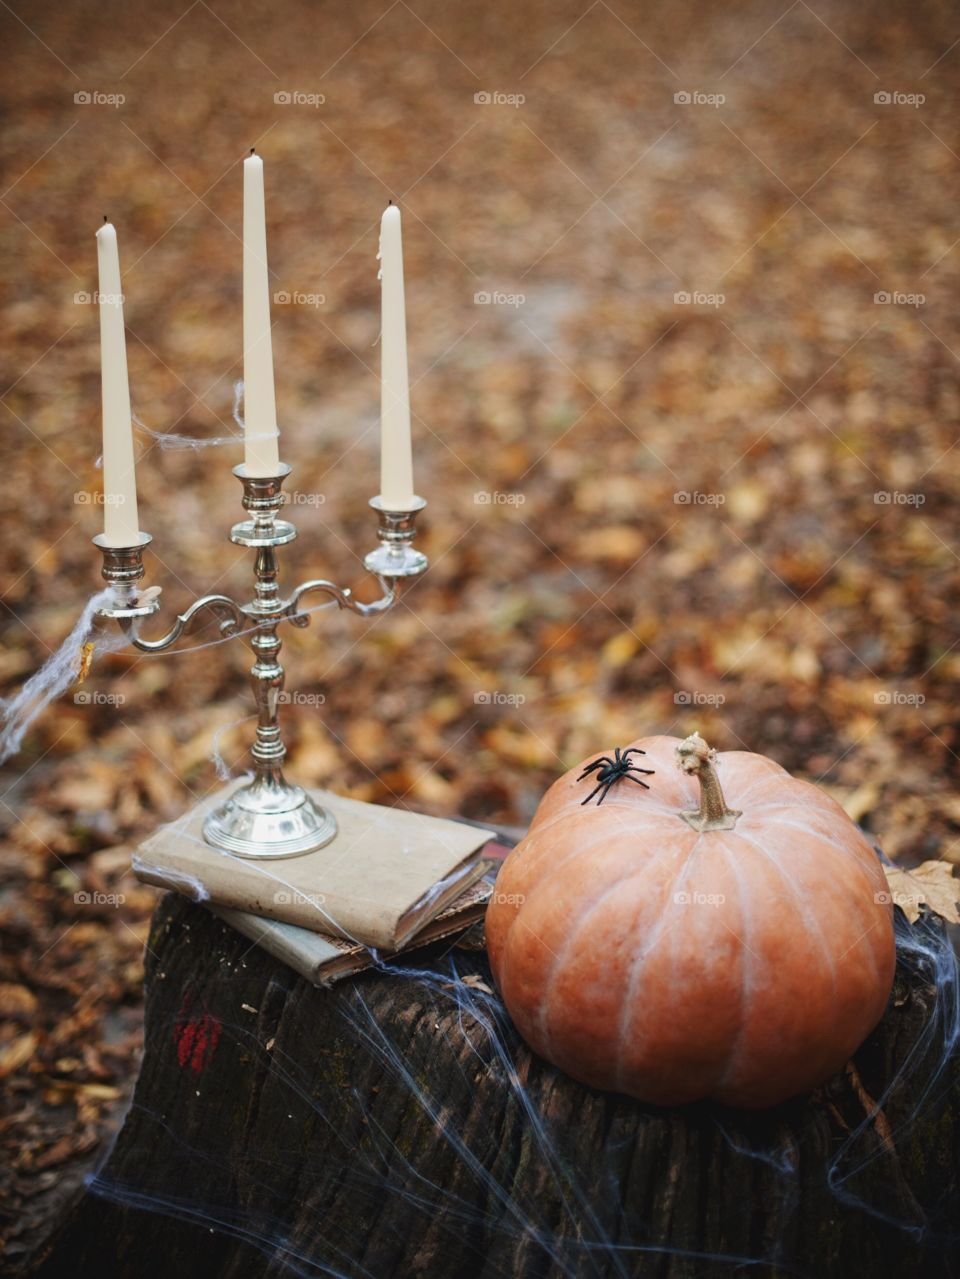 forest, night, holiday, decorations, snacks, fall, orange, black, mystery, Halloween, dark, glowing, candy, flashlight, ginger, fun, cute, fog, gloomy, burning, candle, flame, Jack, face, smile, autumn, symbol, skeleton, dark, above, scary, good, funny, background, lonely, sadness, darkness, magic, event, bat, Ghost, concept, trick, emblem, Phantom, pumpkin face, pumpkin, October, September, werewolf, mage, terrible, grim, supernatural, treat, trick or treat, horrible, wizard, Jack-lantern